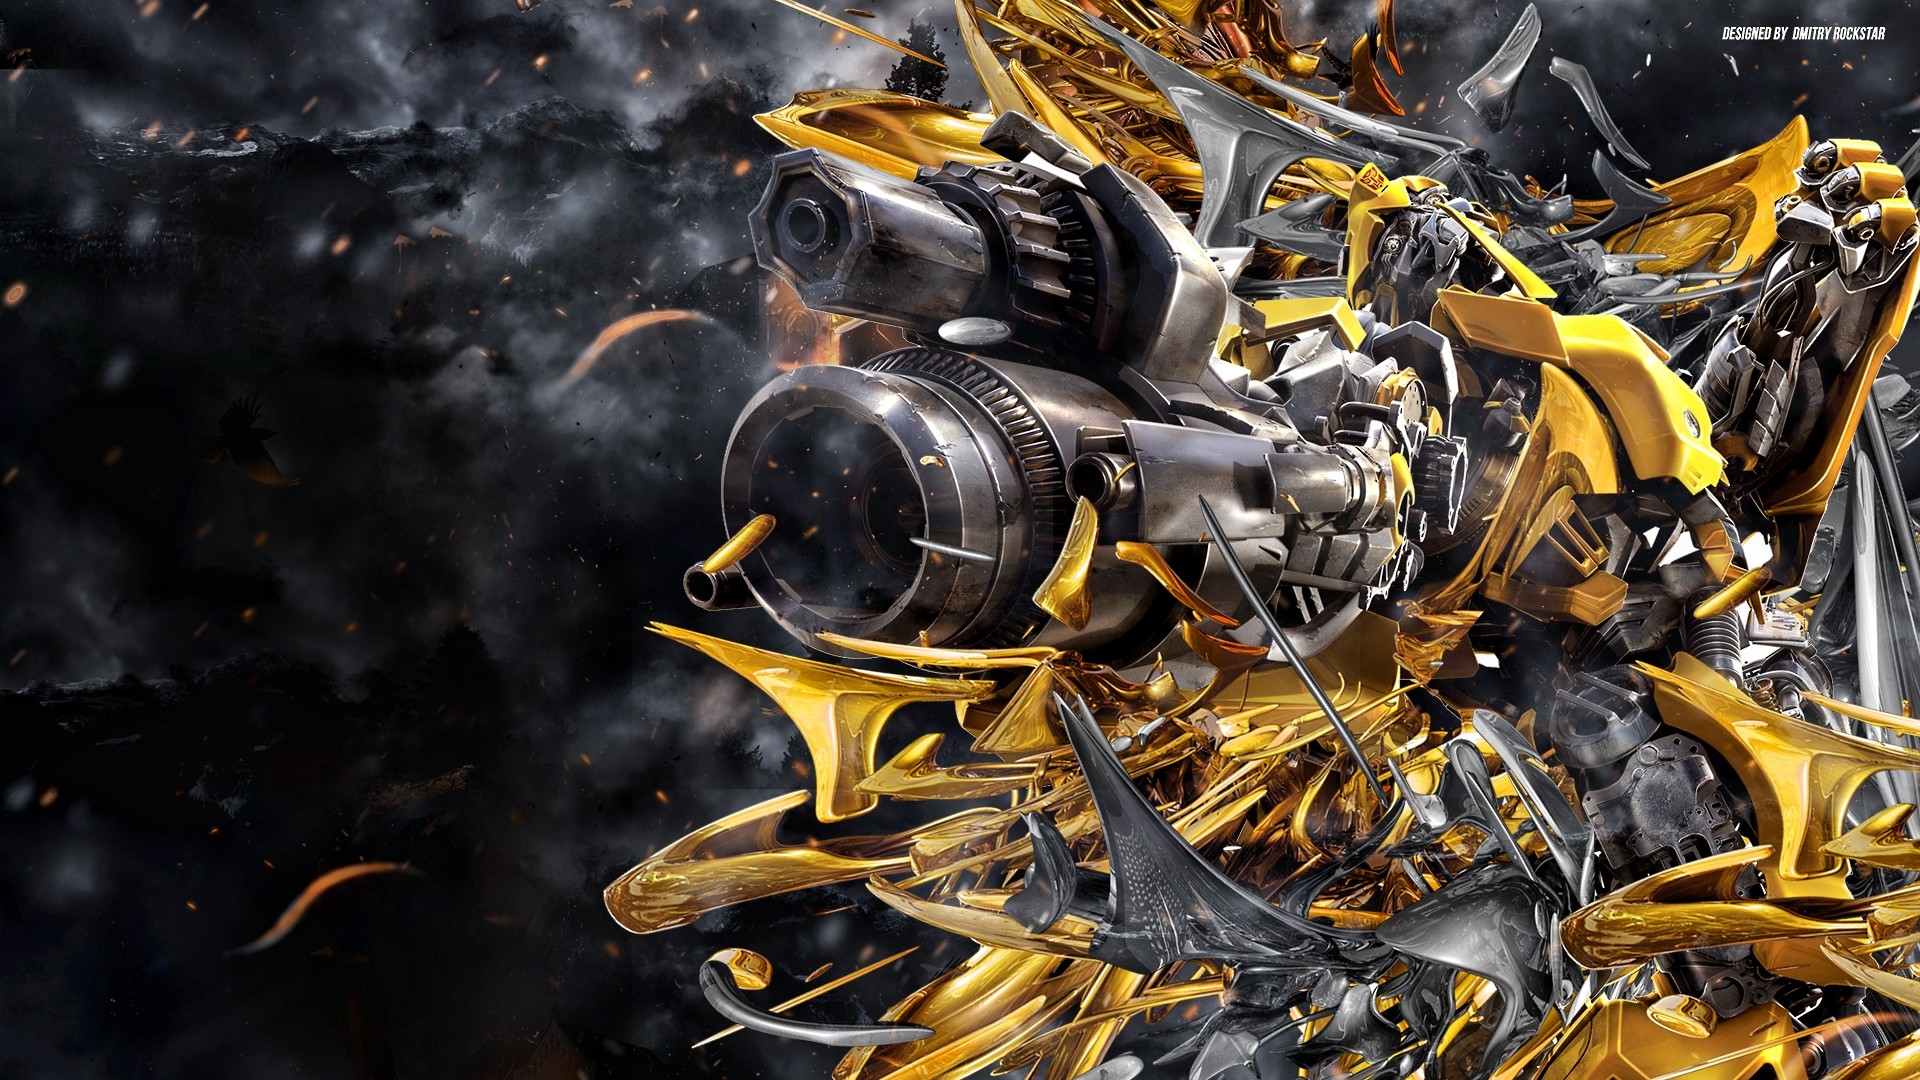 1920x1080 transformers bumblebee hd age of extinction